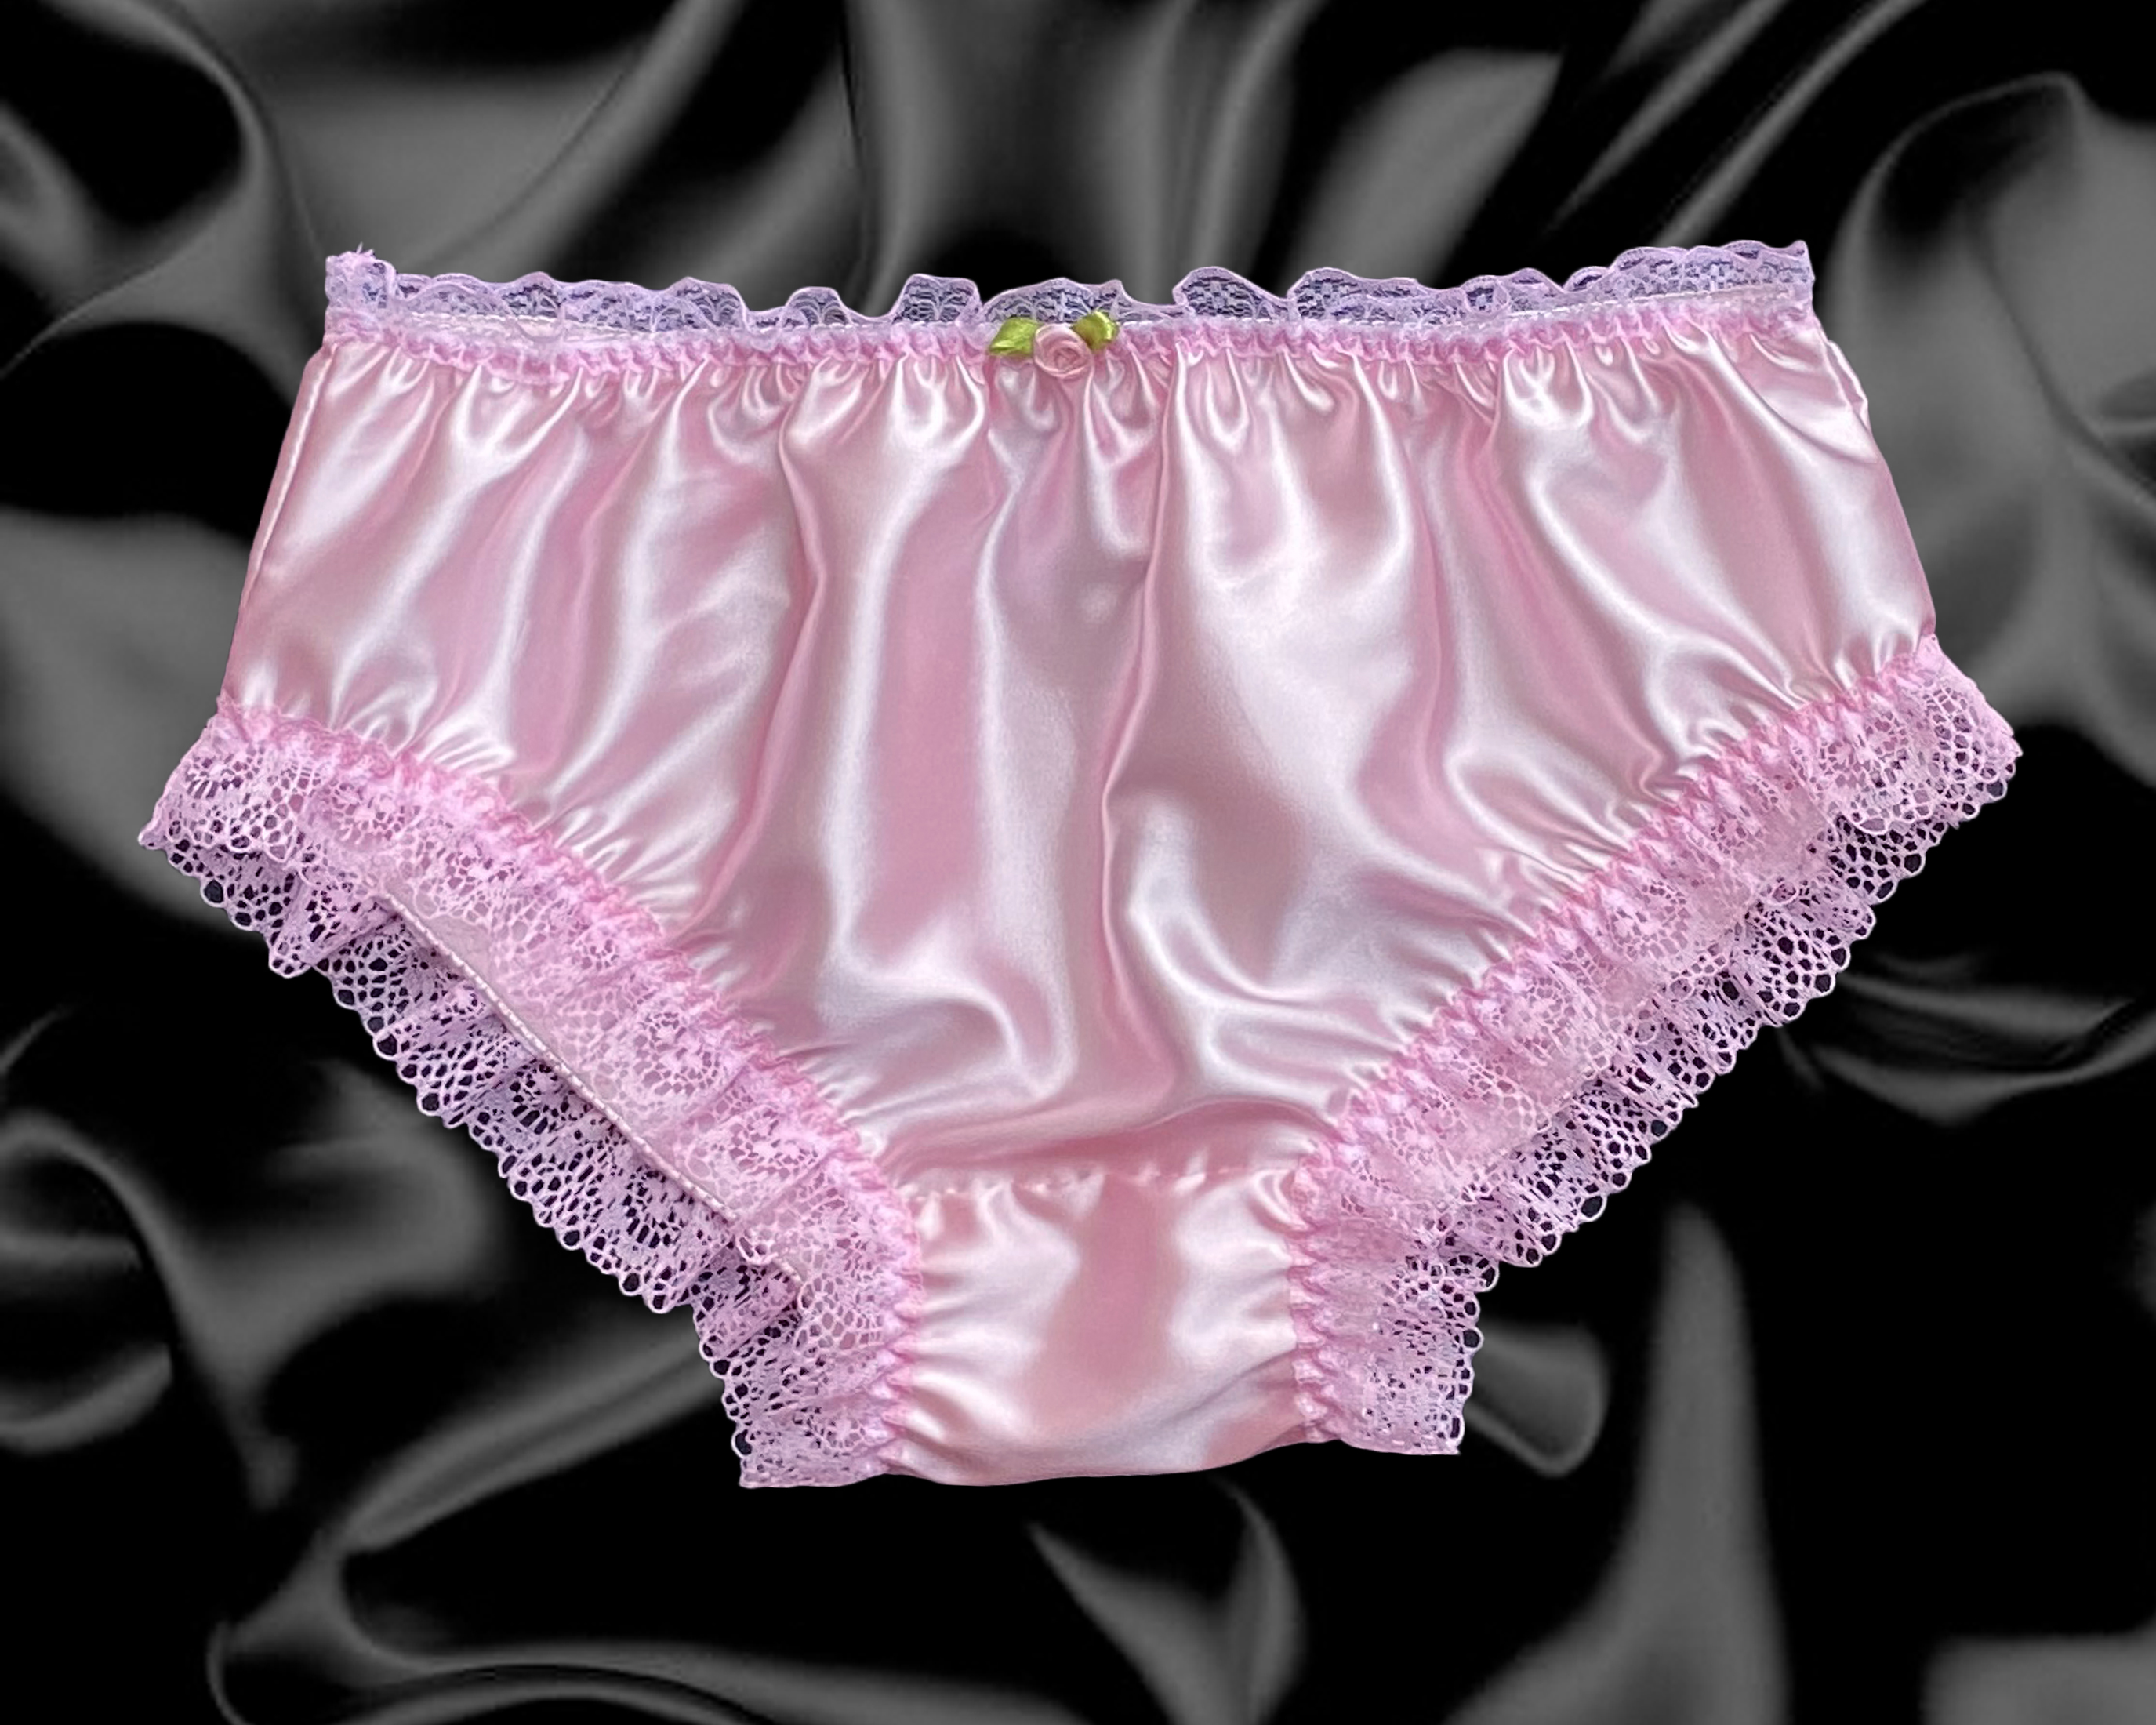 New Baby Pink Satin Frilly Lace Sissy Panties Bikini Knickers Briefs Size 10-20